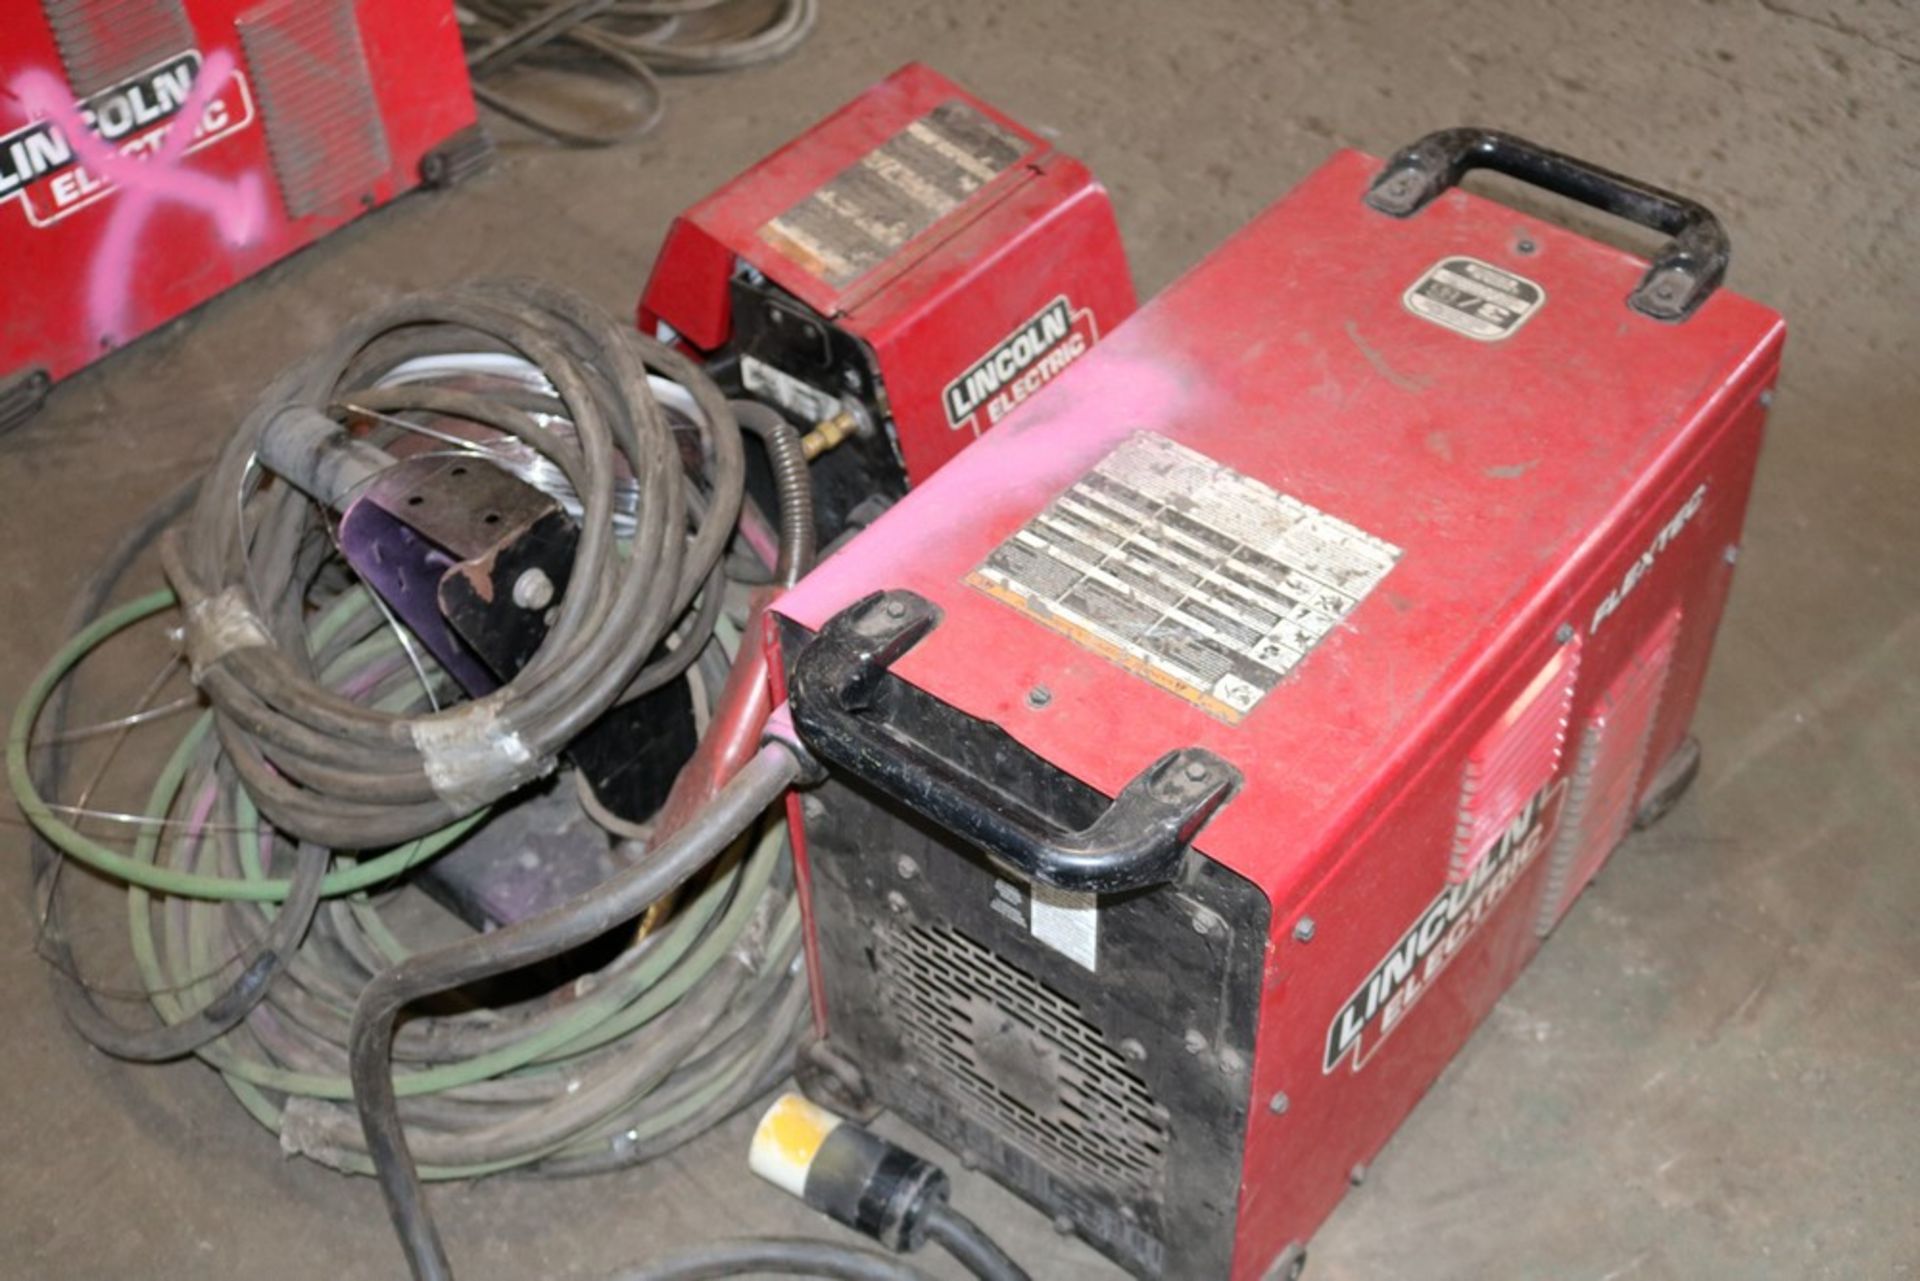 2020 Lincoln Electric Flextec 500X Welder - Image 8 of 9